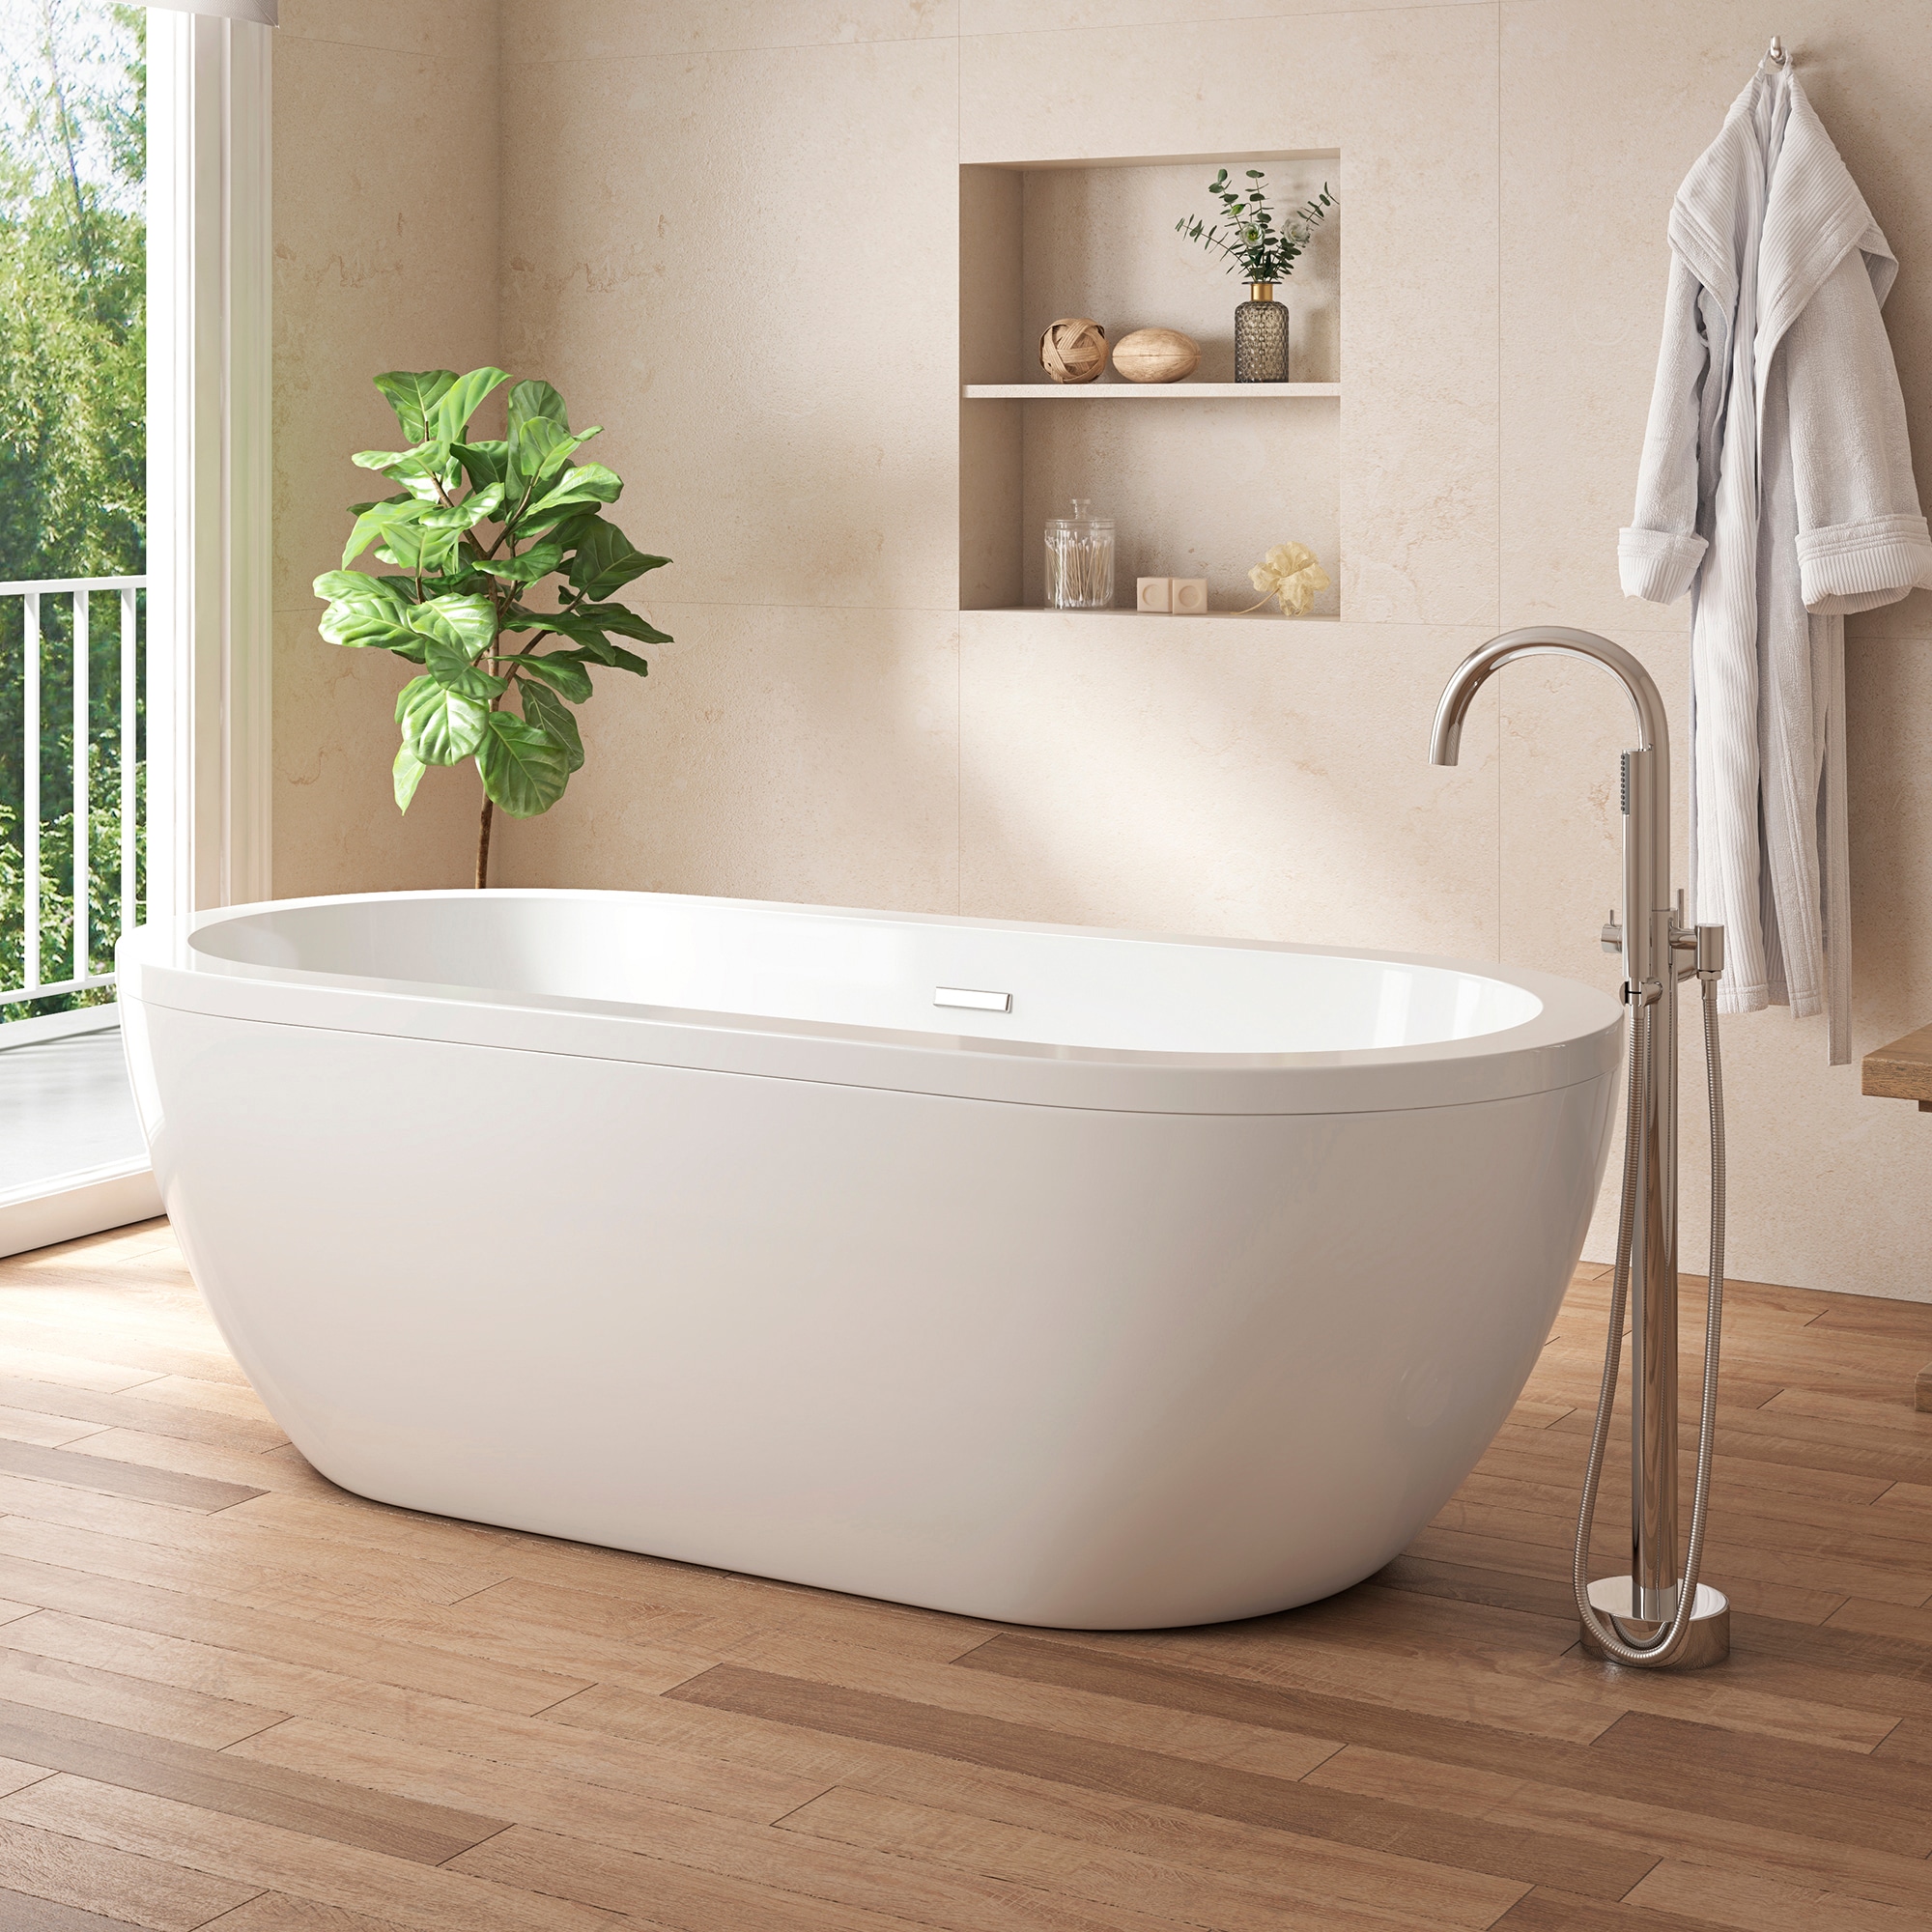 Serenity 34-in x 71-in Gloss White Acrylic Oval Freestanding Soaking Bathtub with Drain (Center Drain) | - OVE Decors SERENITY-71